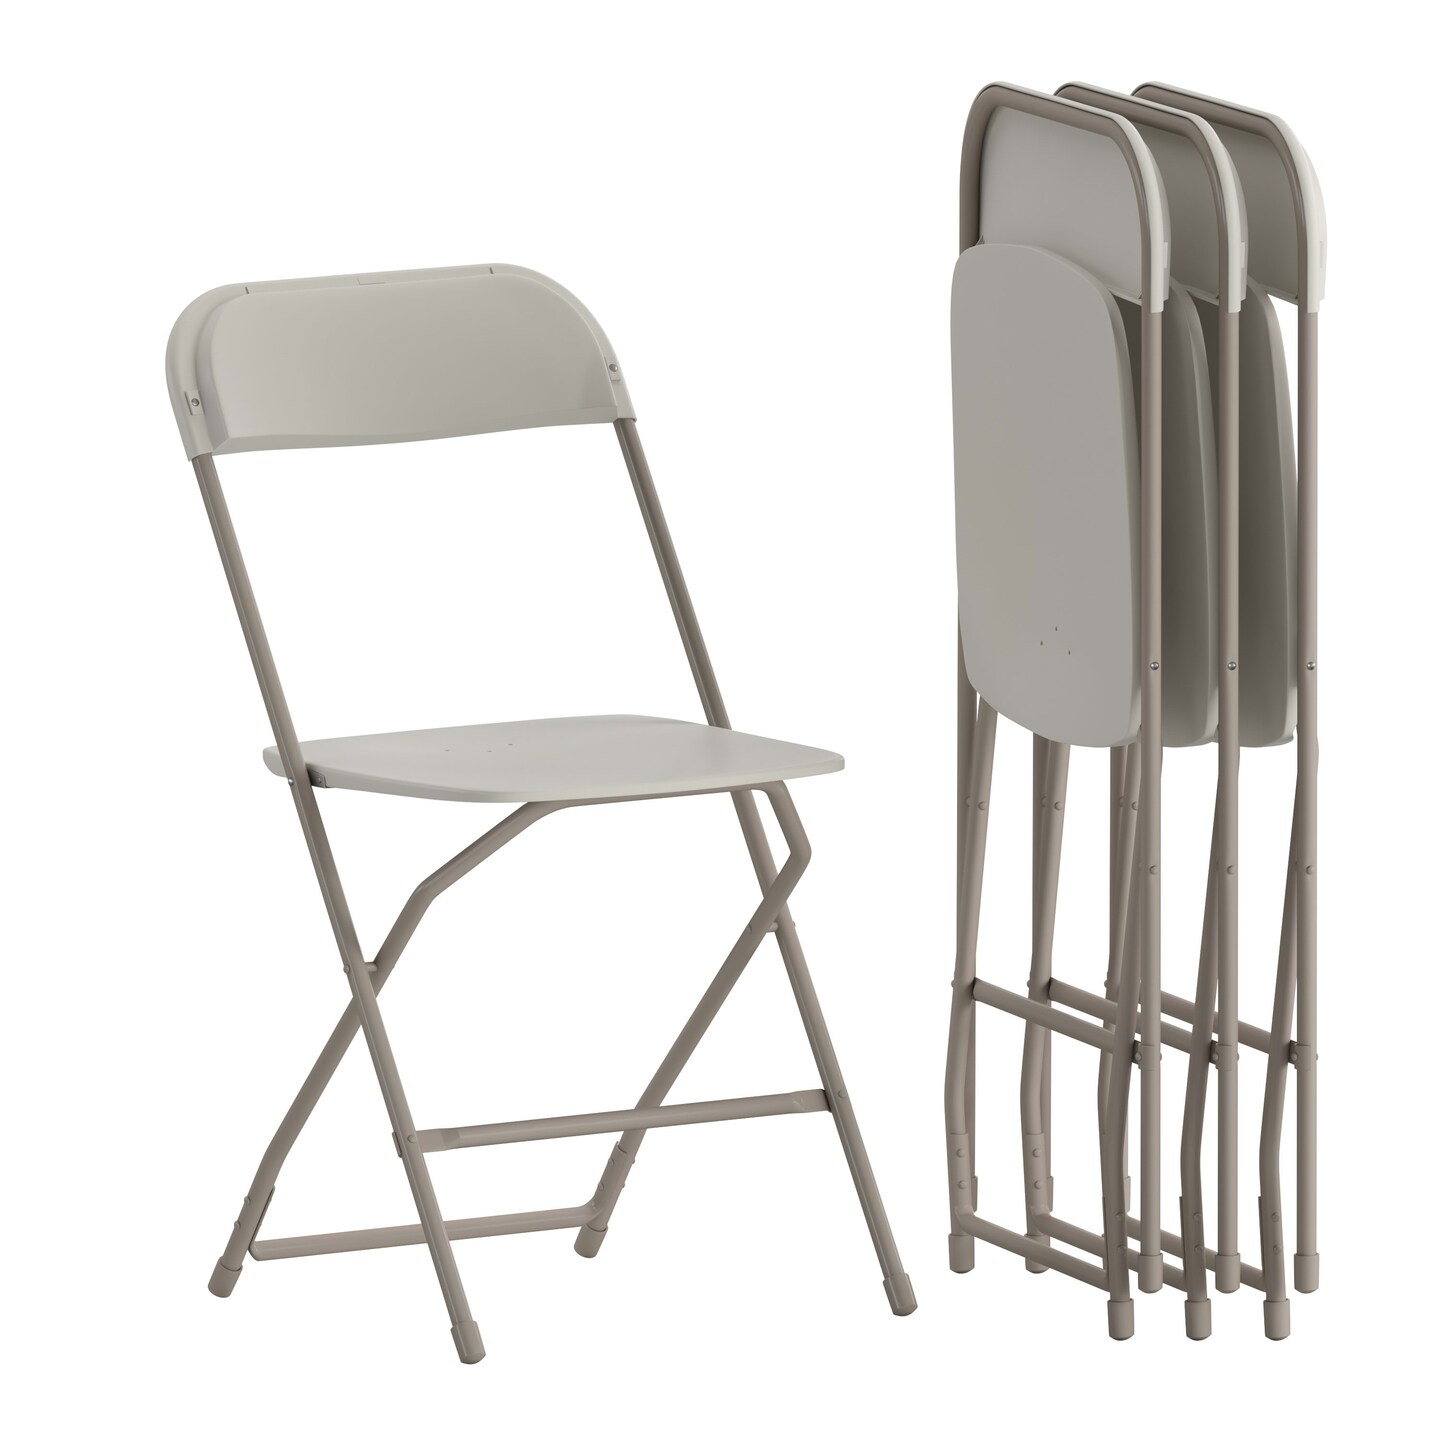 Emma and Oliver Plastic Folding Chair - 4 Pack 650LB Weight Capacity